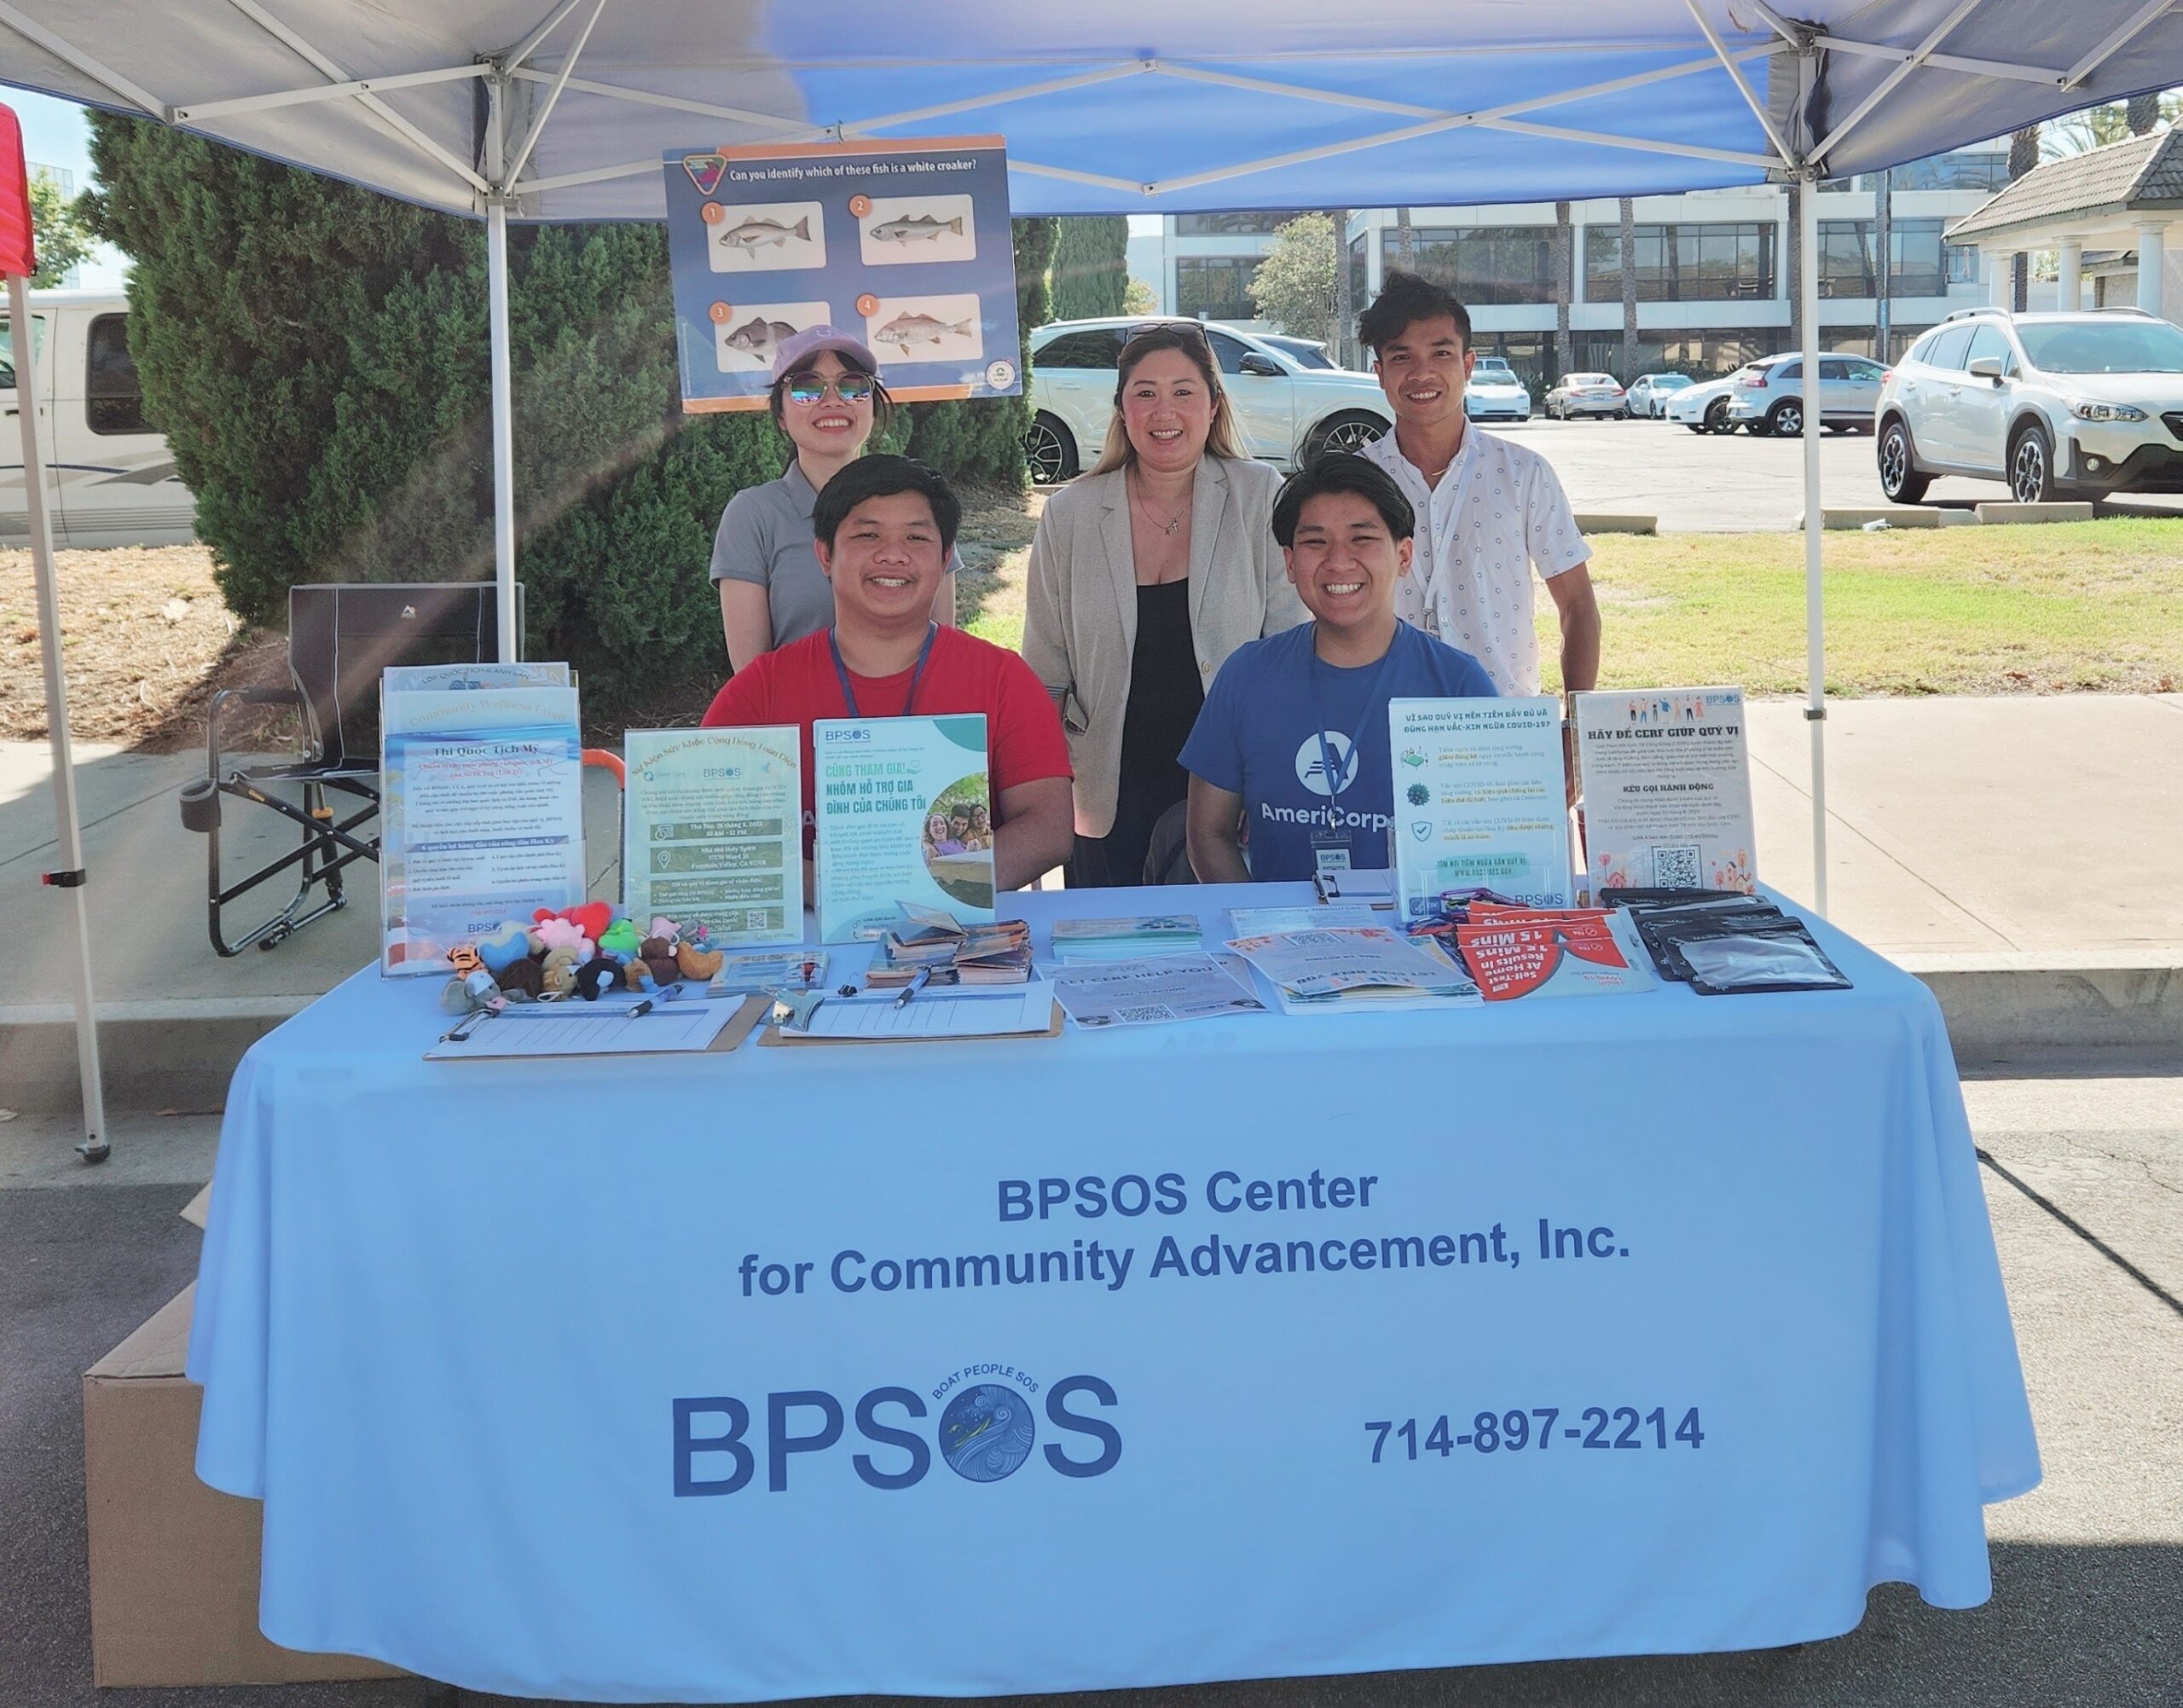 Five smiling adults, at a BPSOS table, are distributing information about vaccines and COVID-19 at an outdoor health care event.